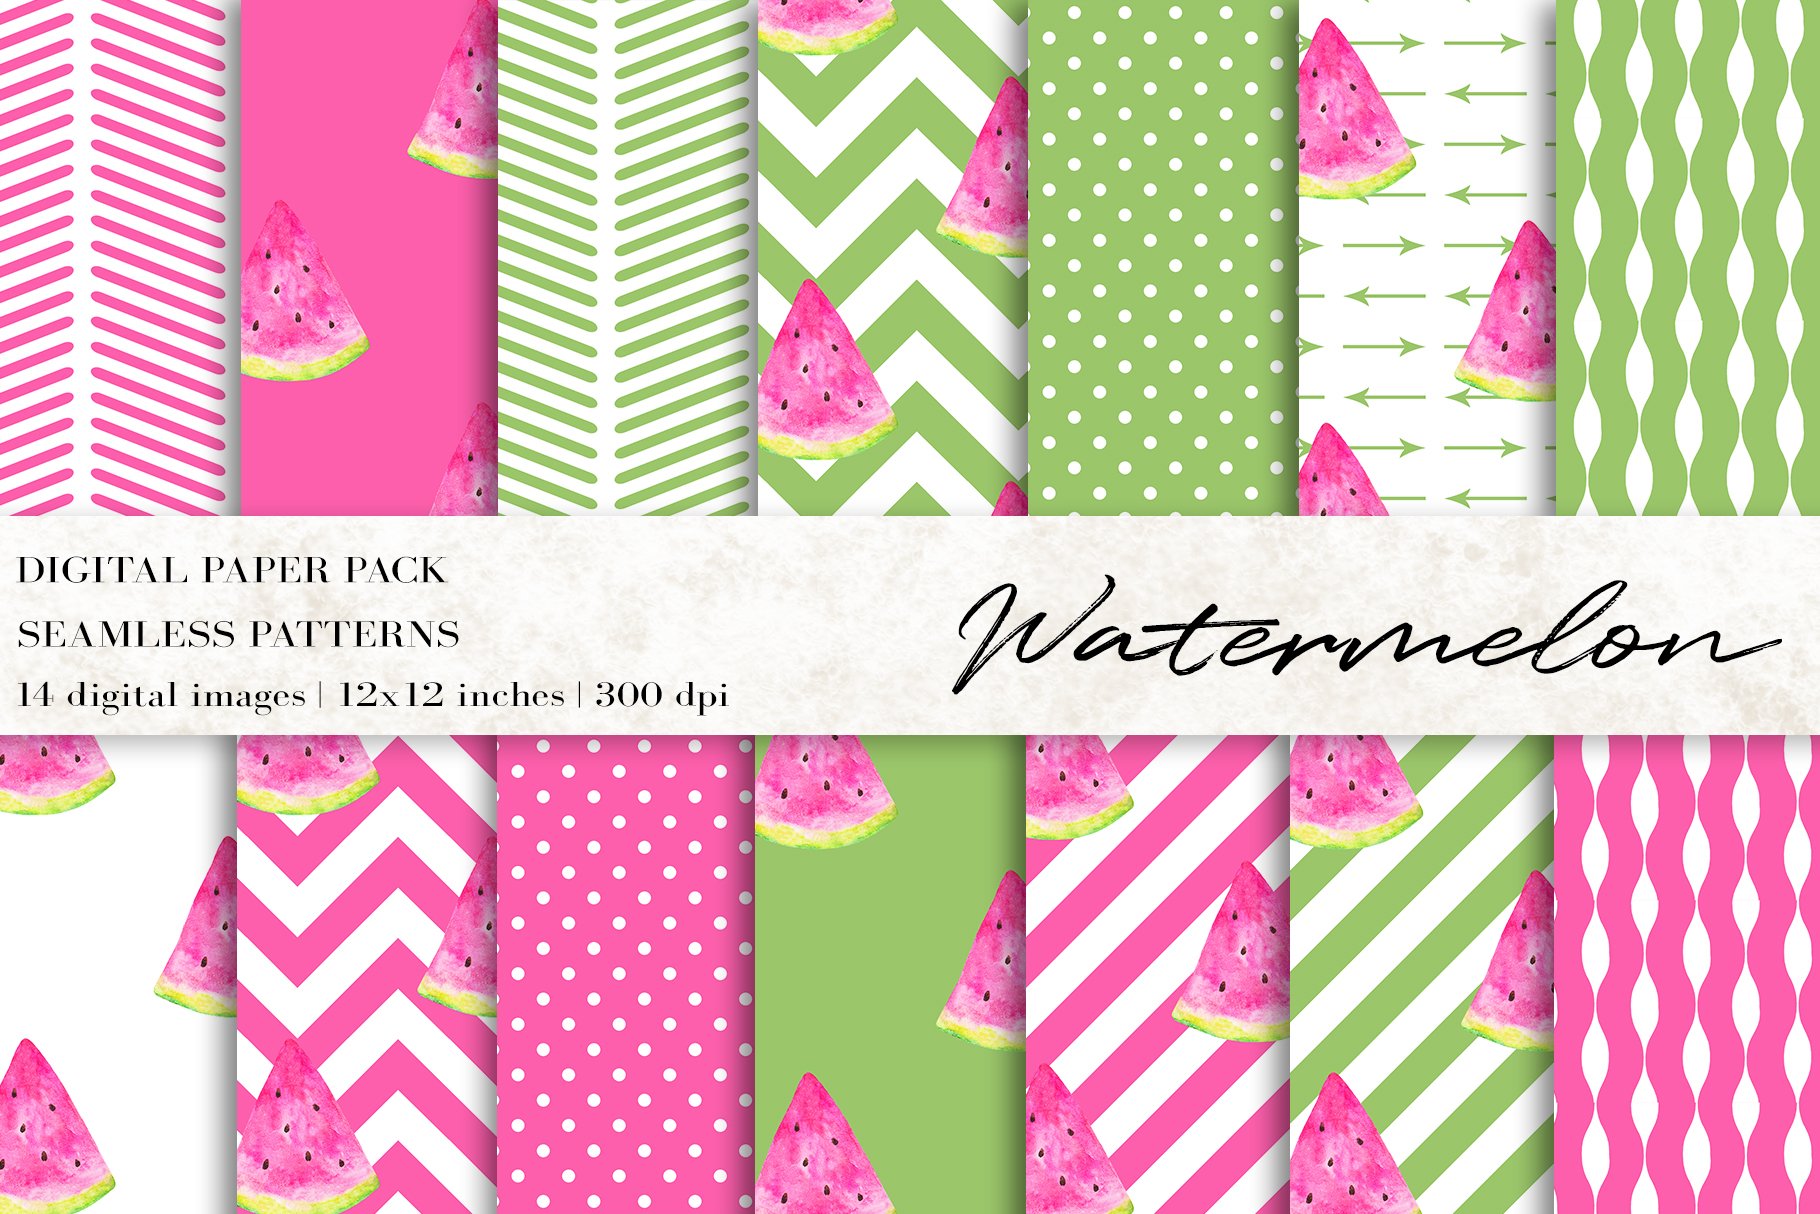 Watercolor Watermelon Digital Papers cover image.